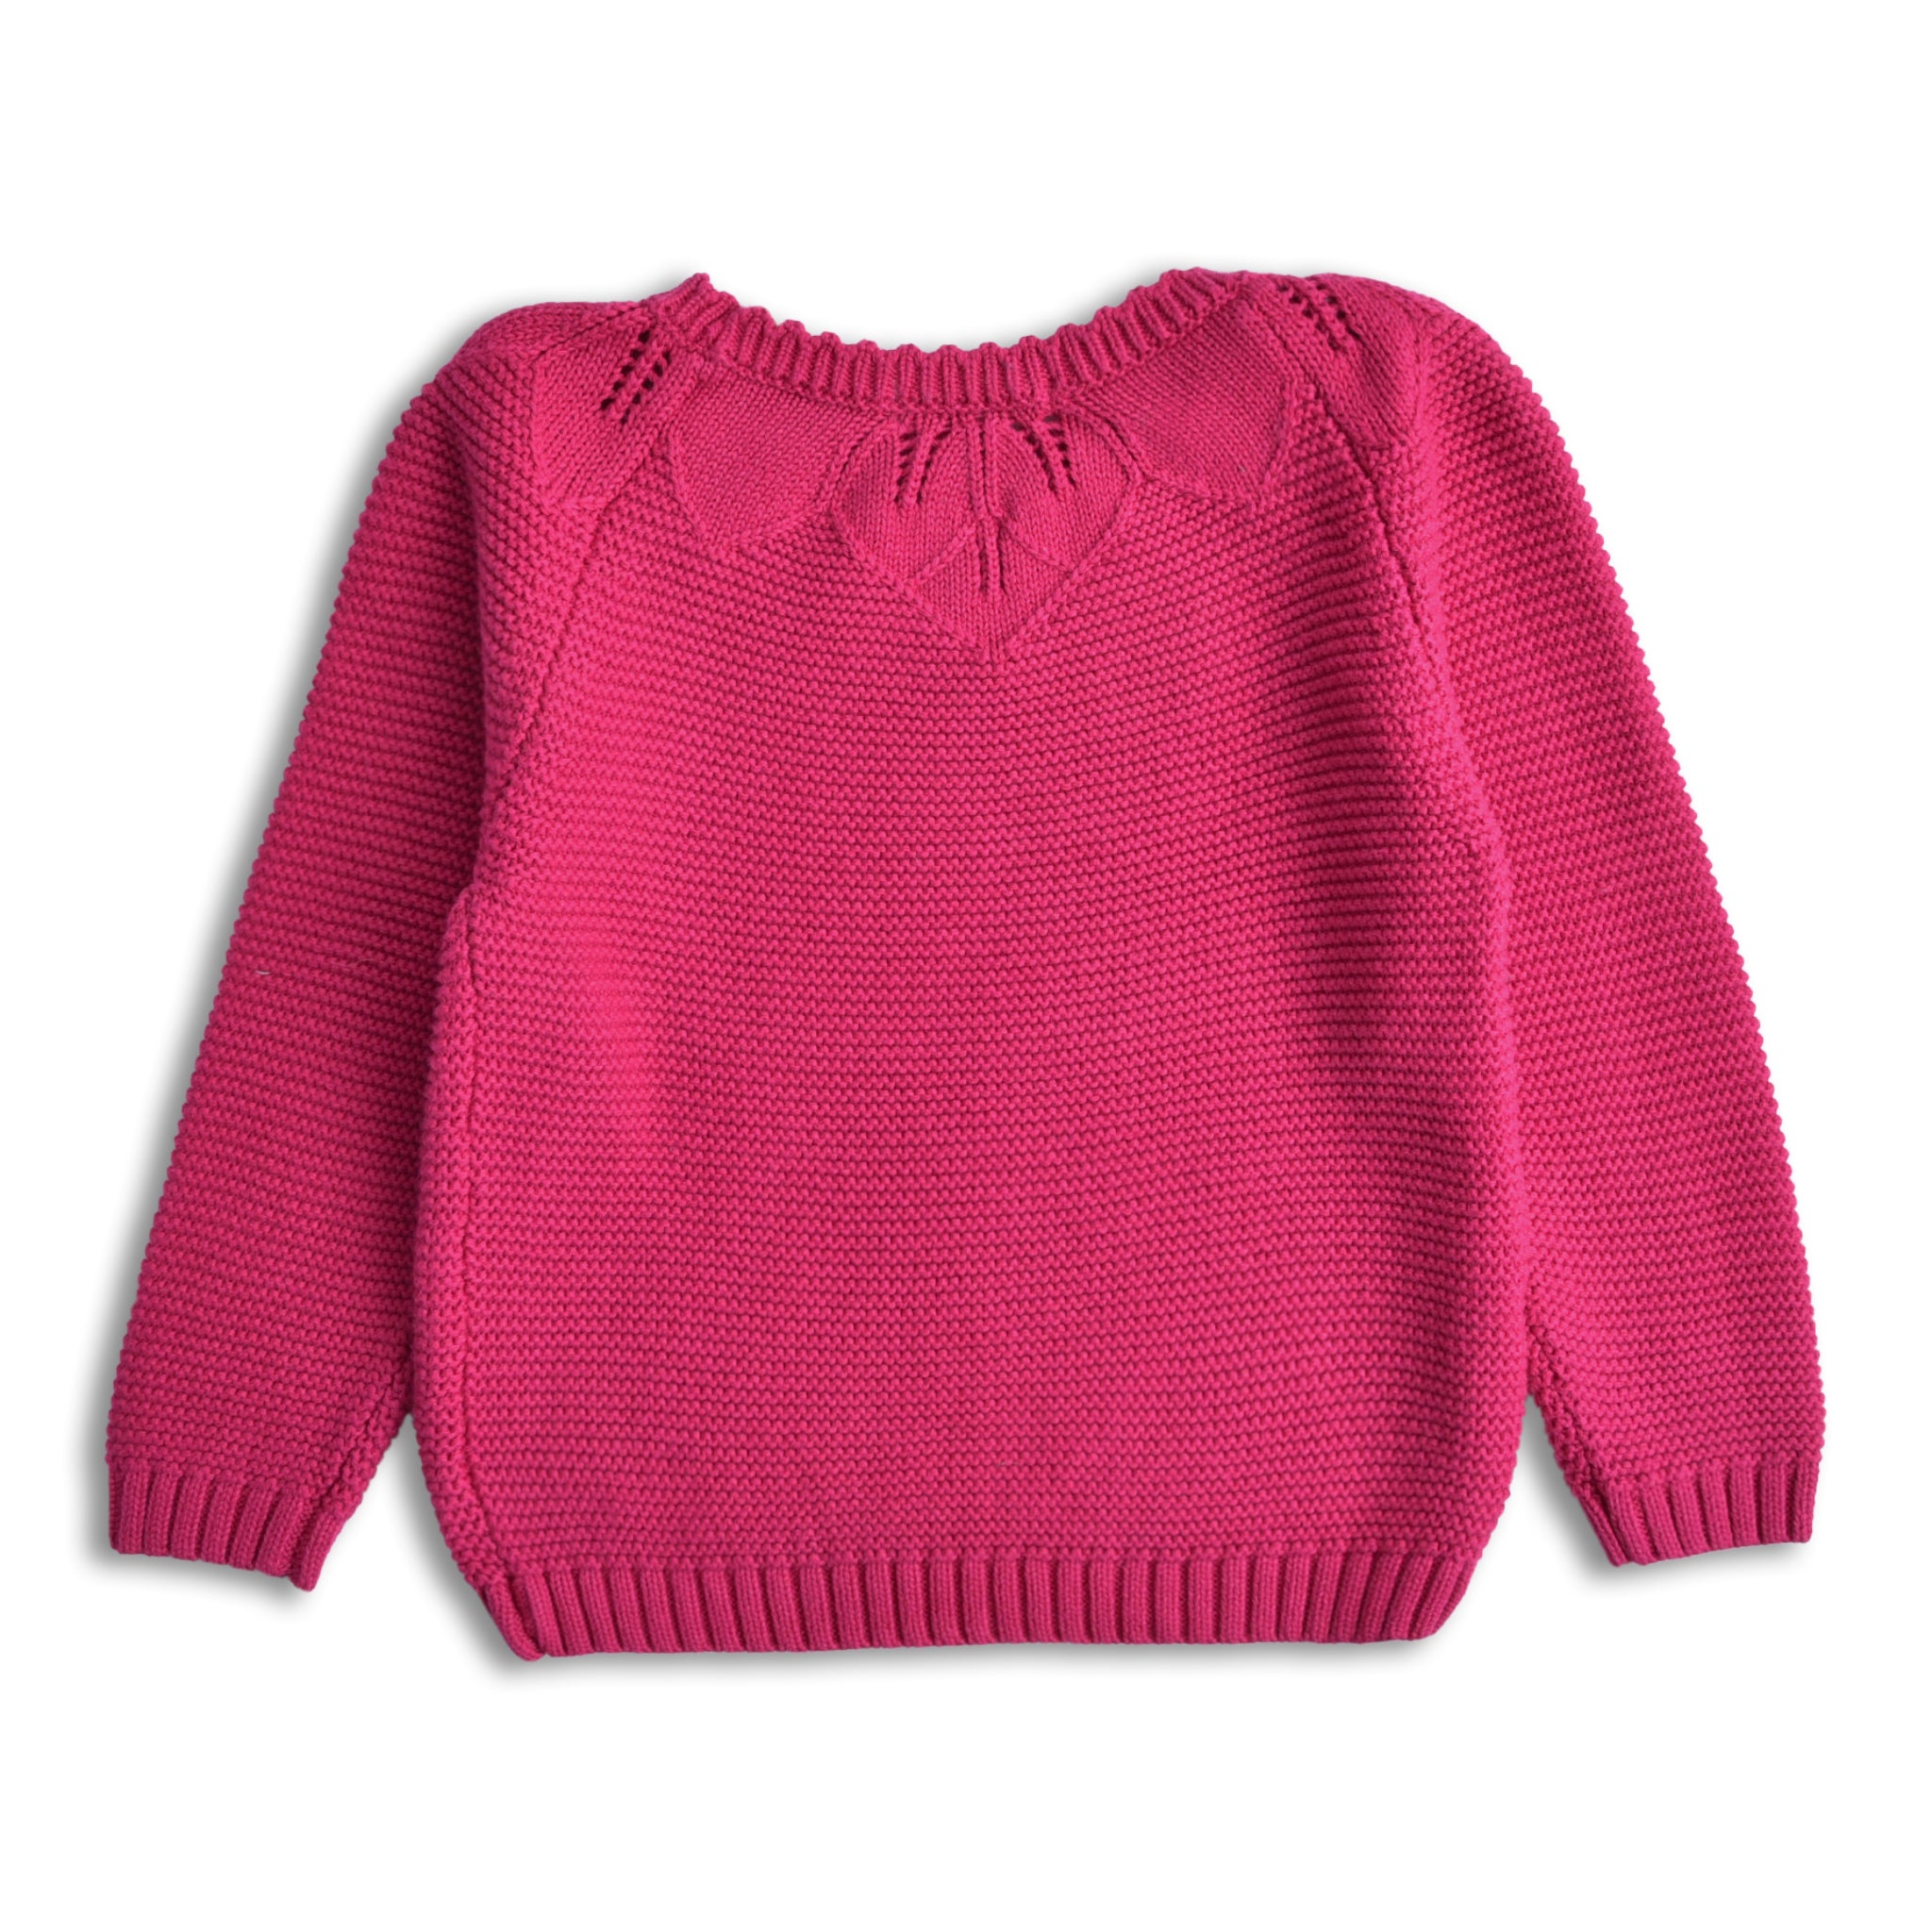 Hot Pink Knitted Sweater